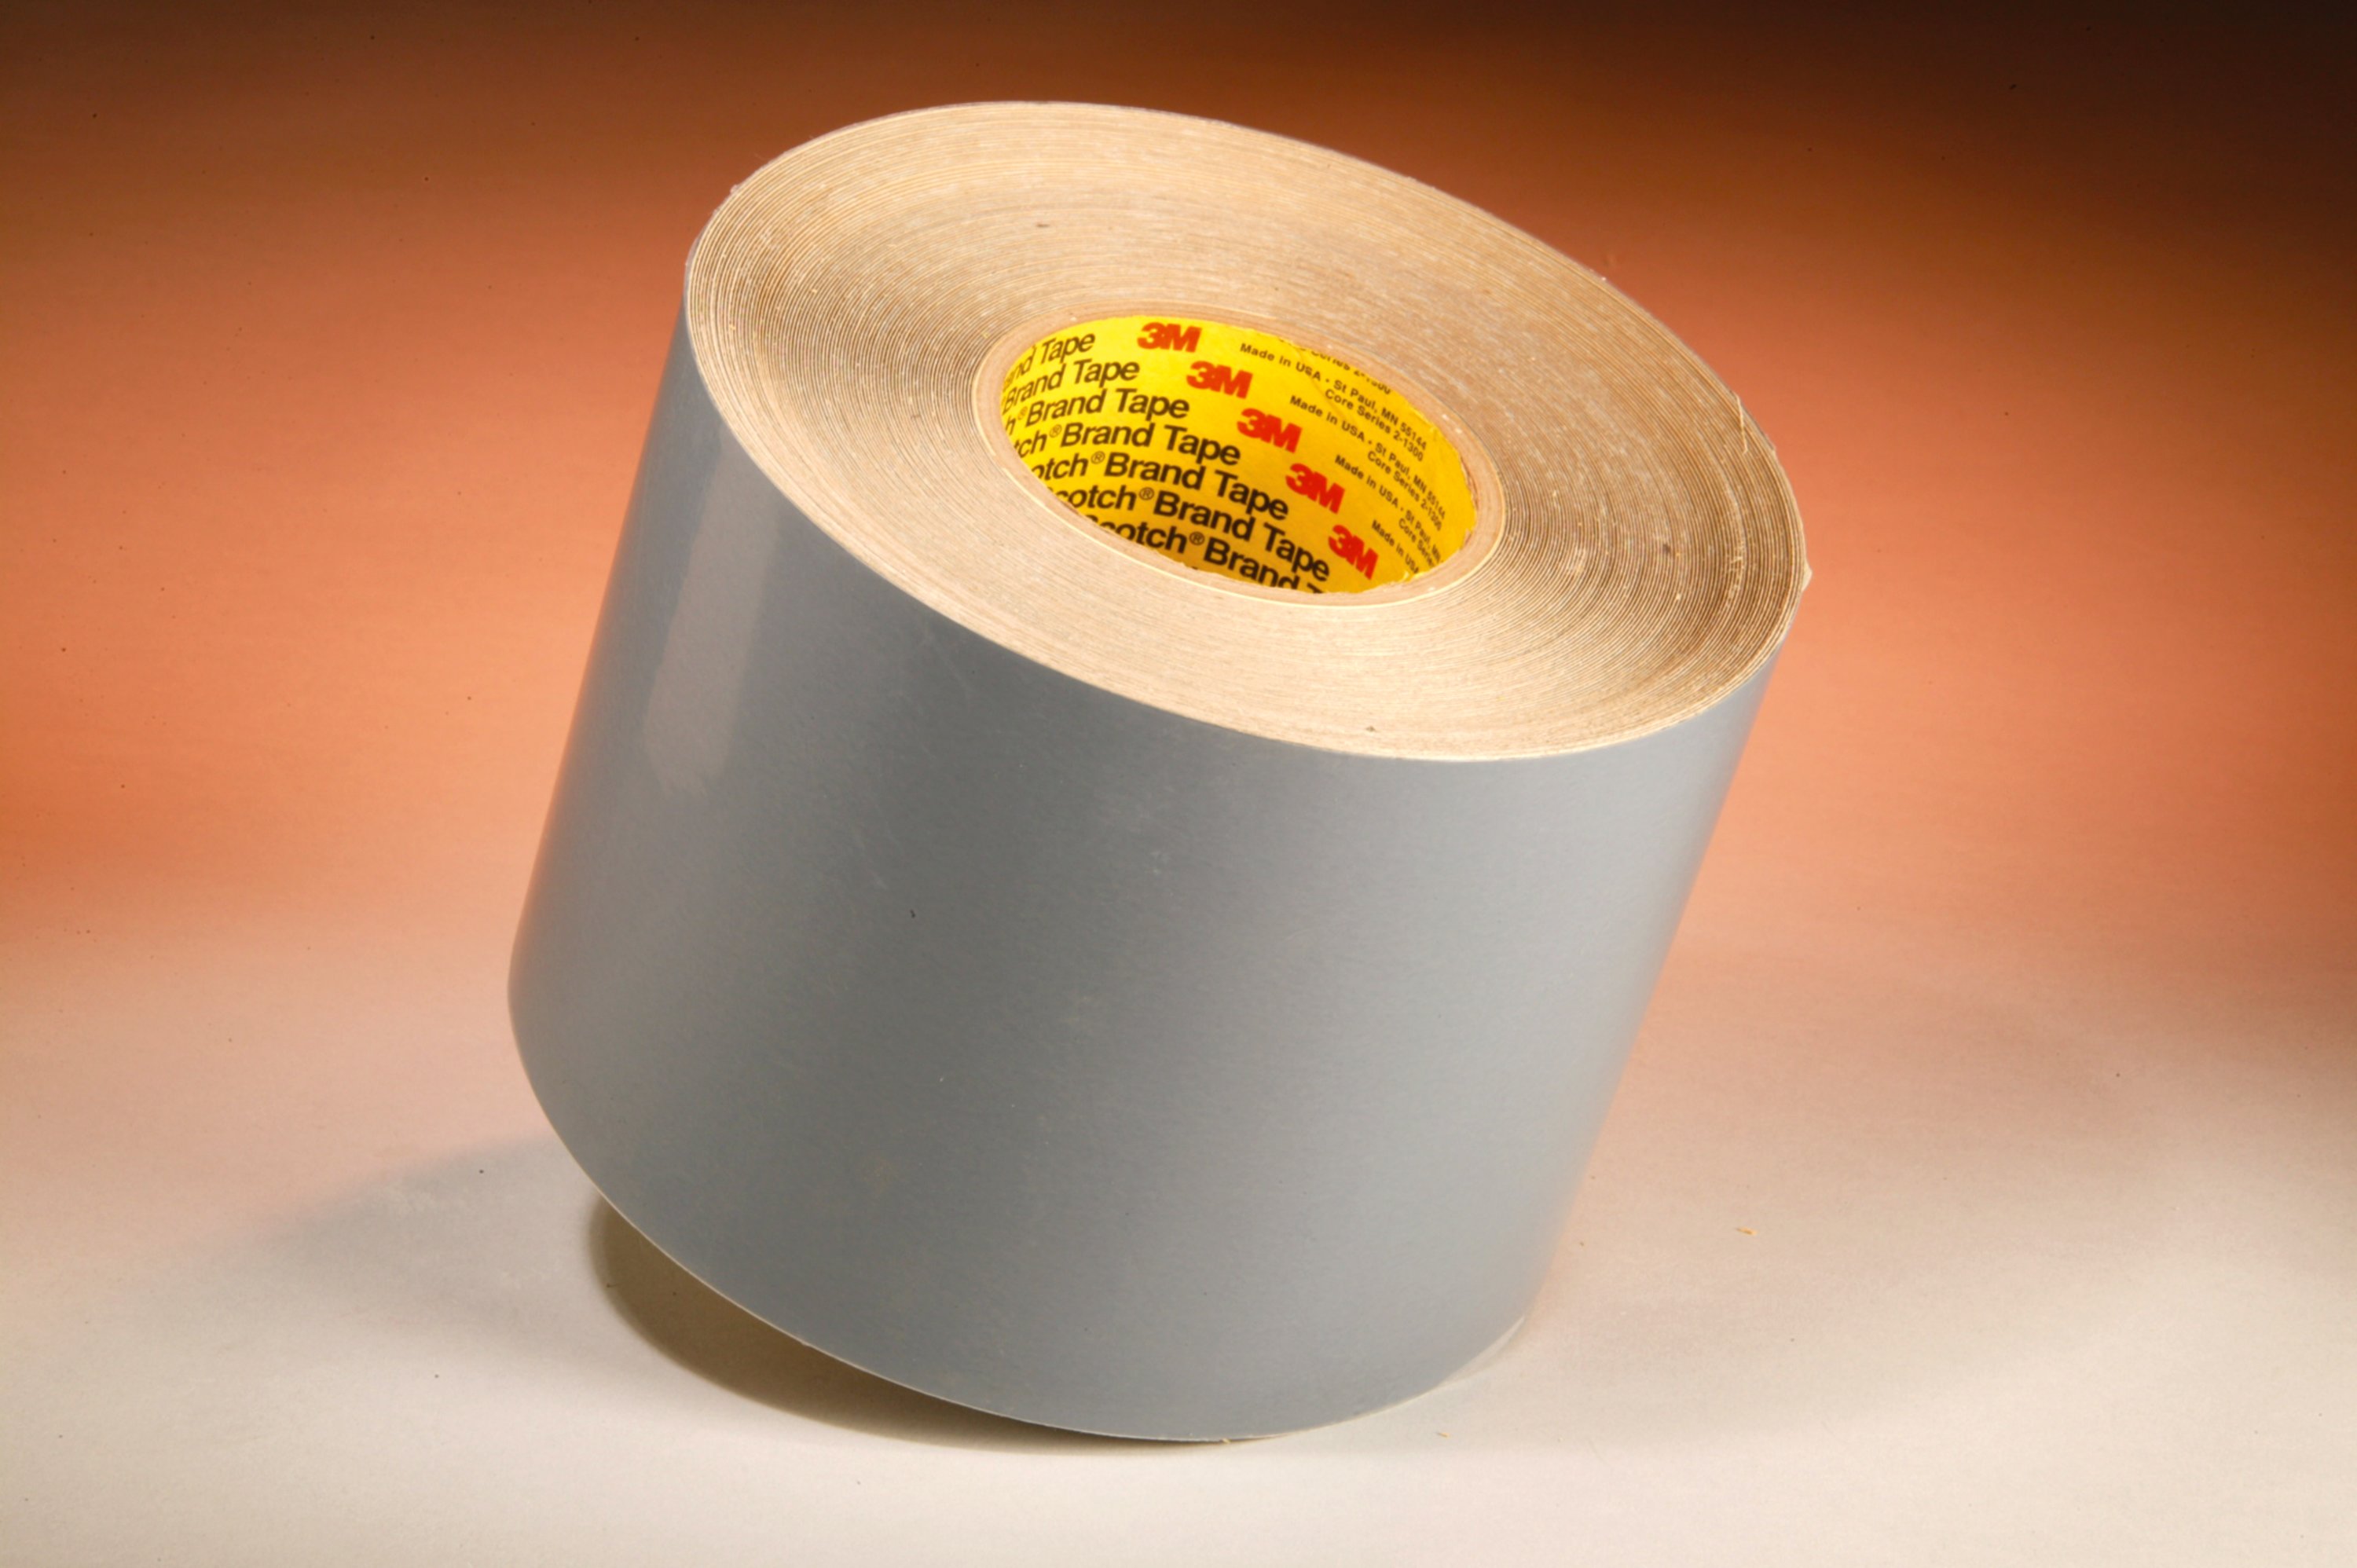 3M™ Flexomount™ Plate Mounting Tape 412DL features a soft rubber adhesive that offers excellent adhesion to both rubber and photopolymer plates